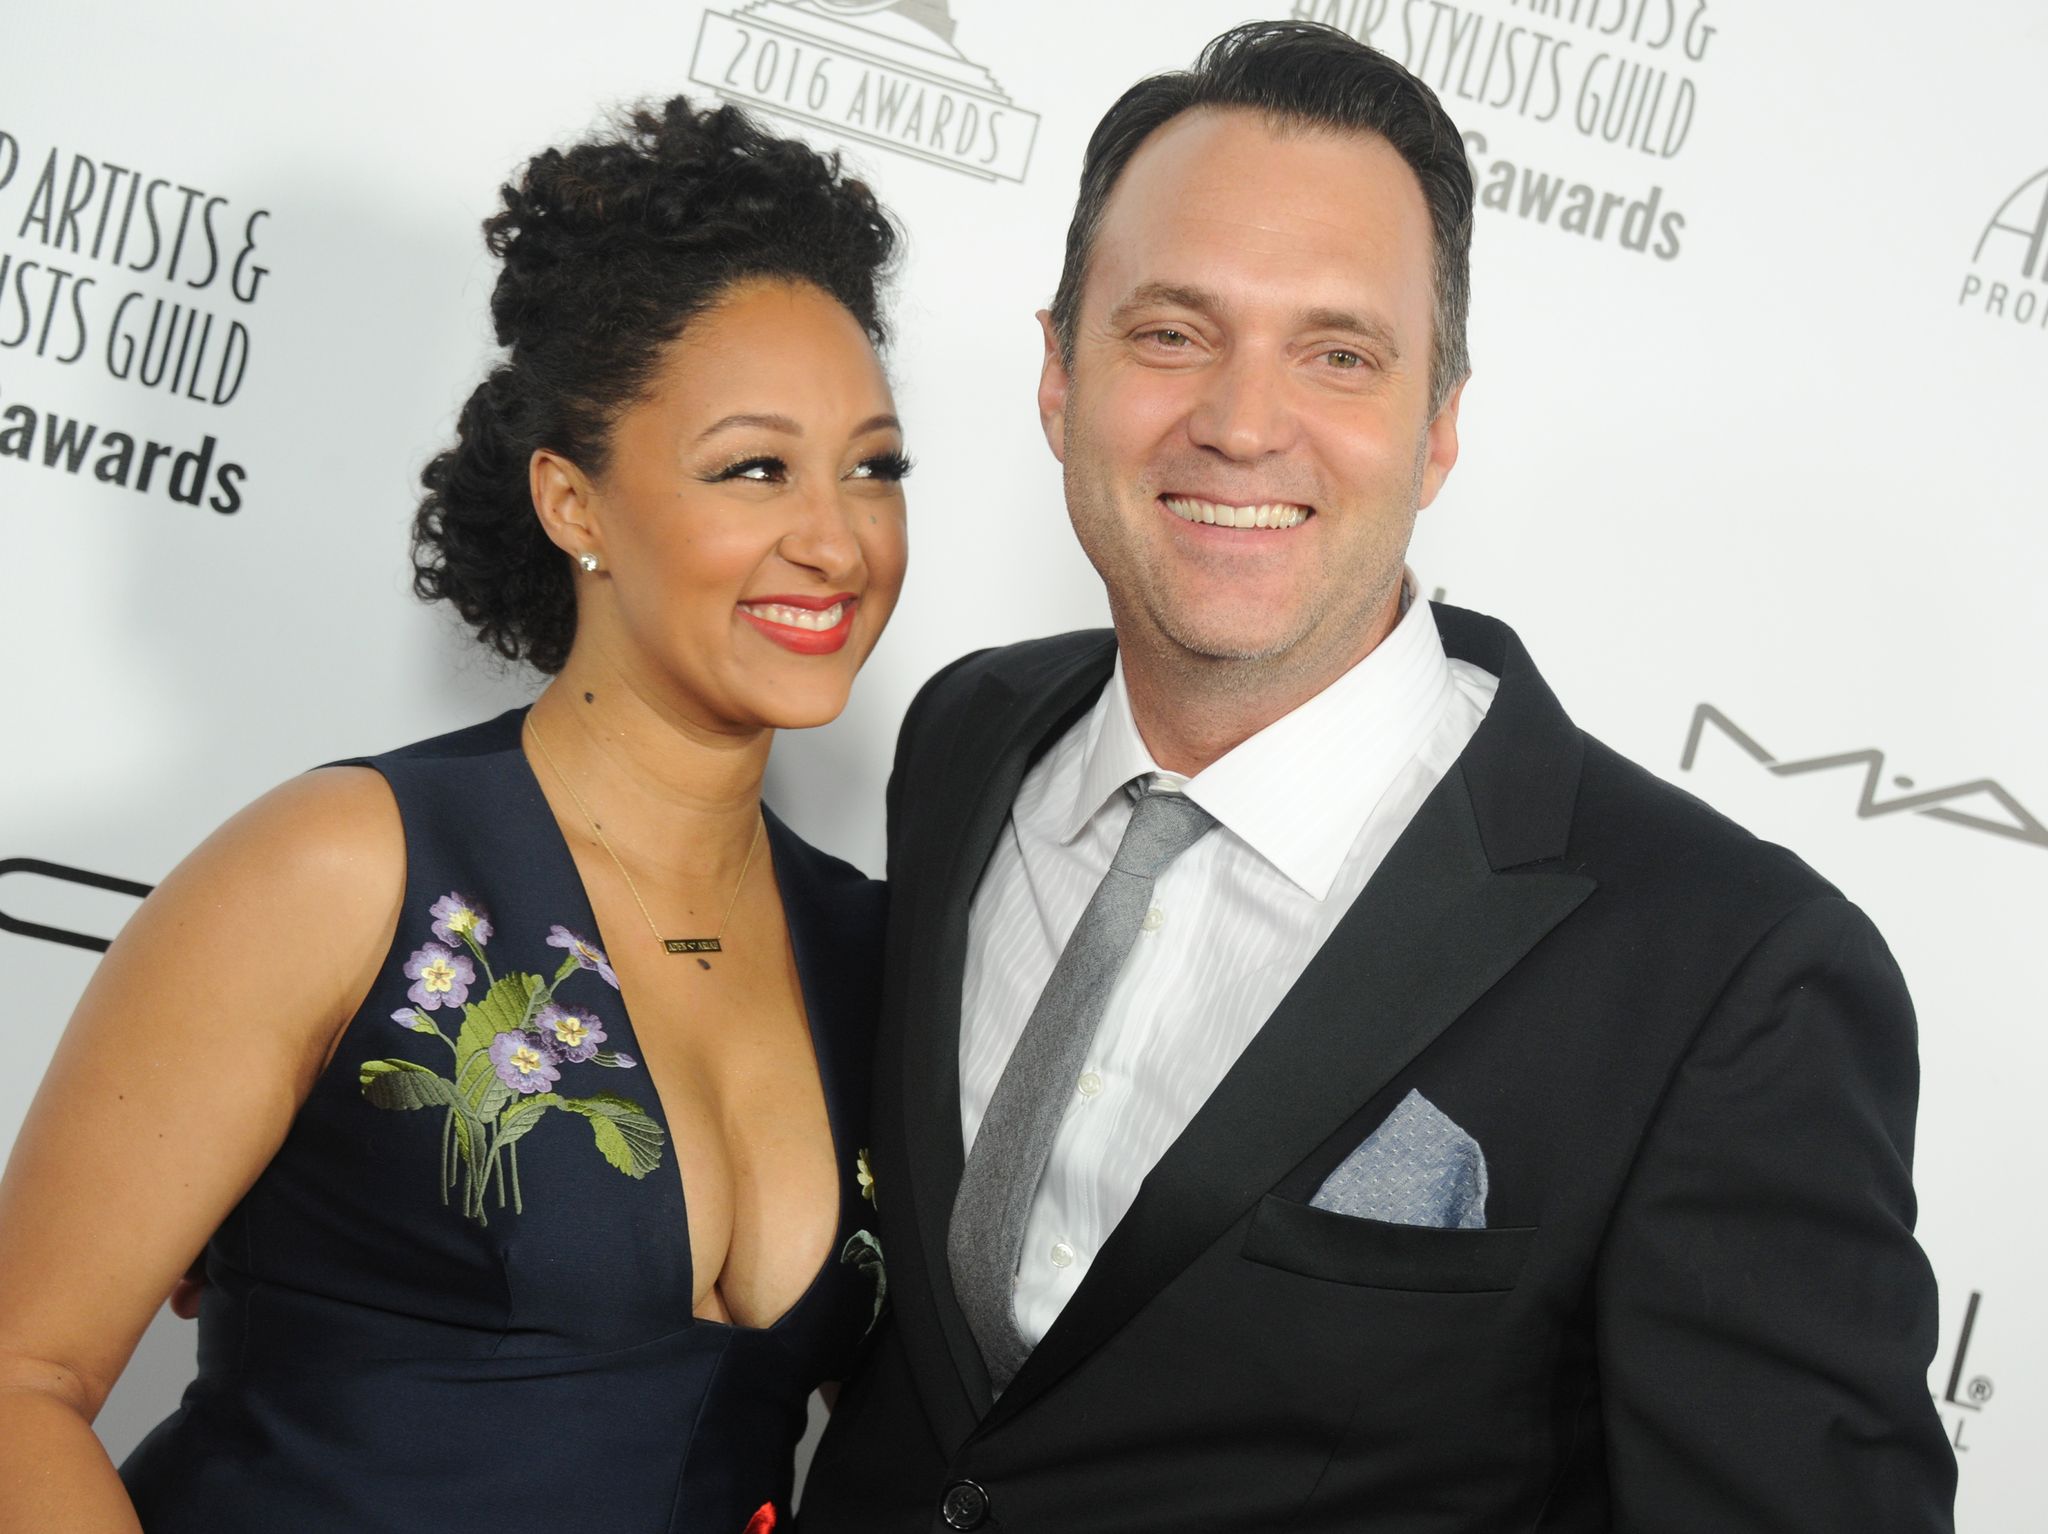 Tamera Mowry-Housley and Adam Housley arrive on the red carpet of the "Make-Up Artists and Hair Stylists Guild Awards" on February 20, 2016, in Hollywood, California | Source: Tibrina Hobson/Getty Images